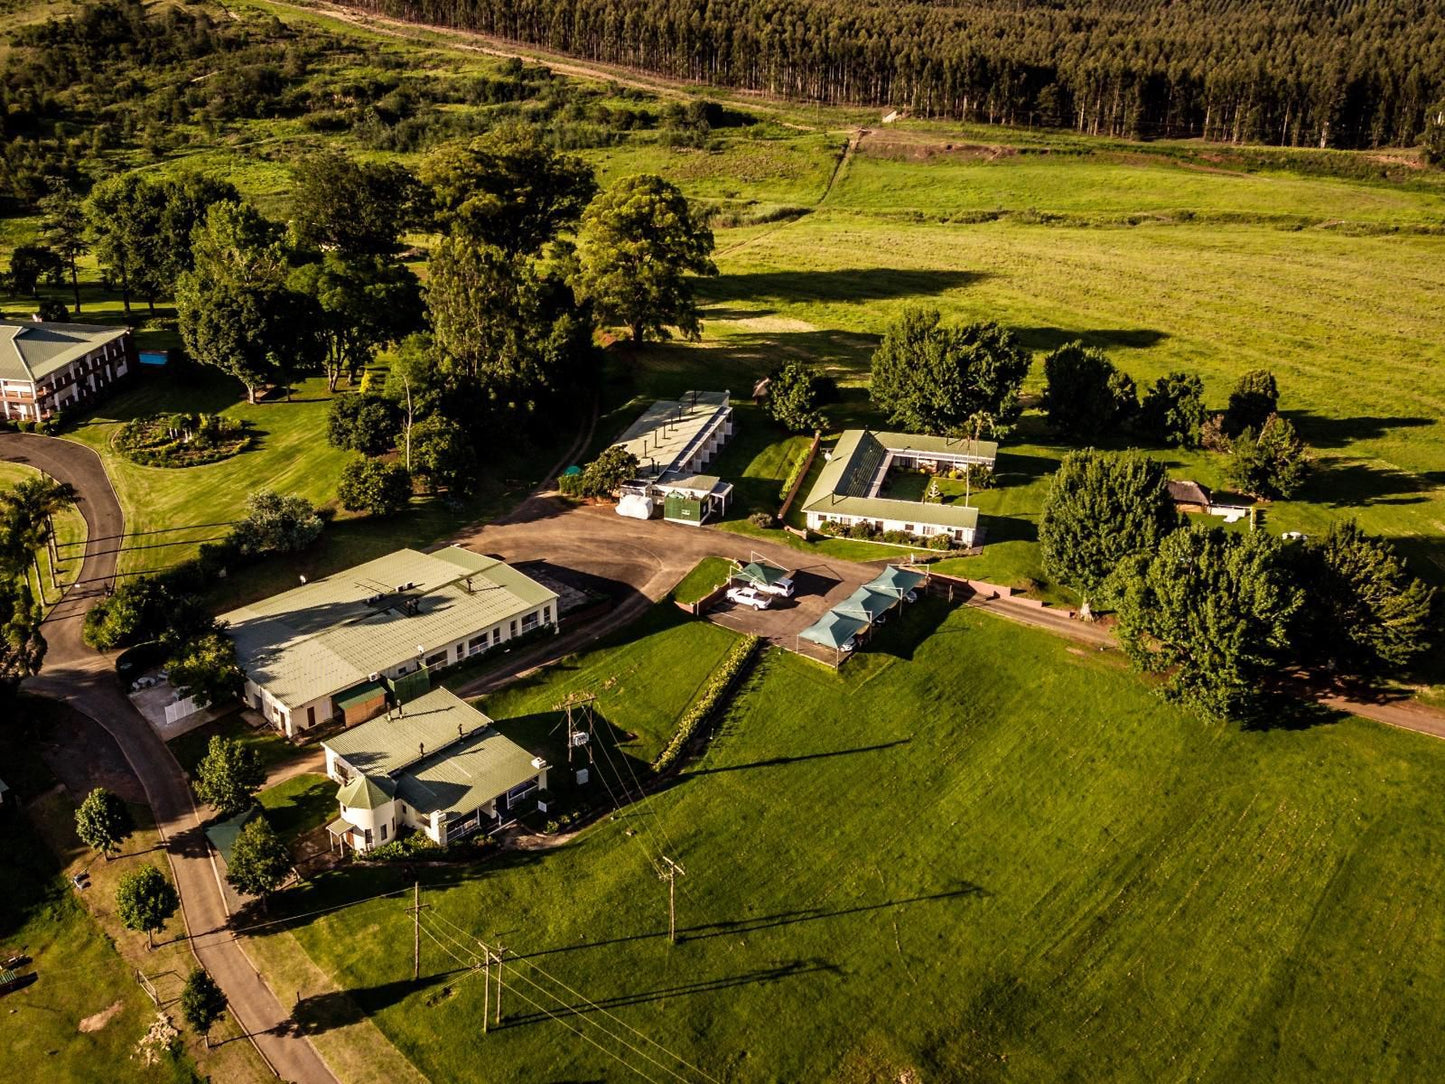 St Ives Lodge And Venue Howick Kwazulu Natal South Africa Aerial Photography